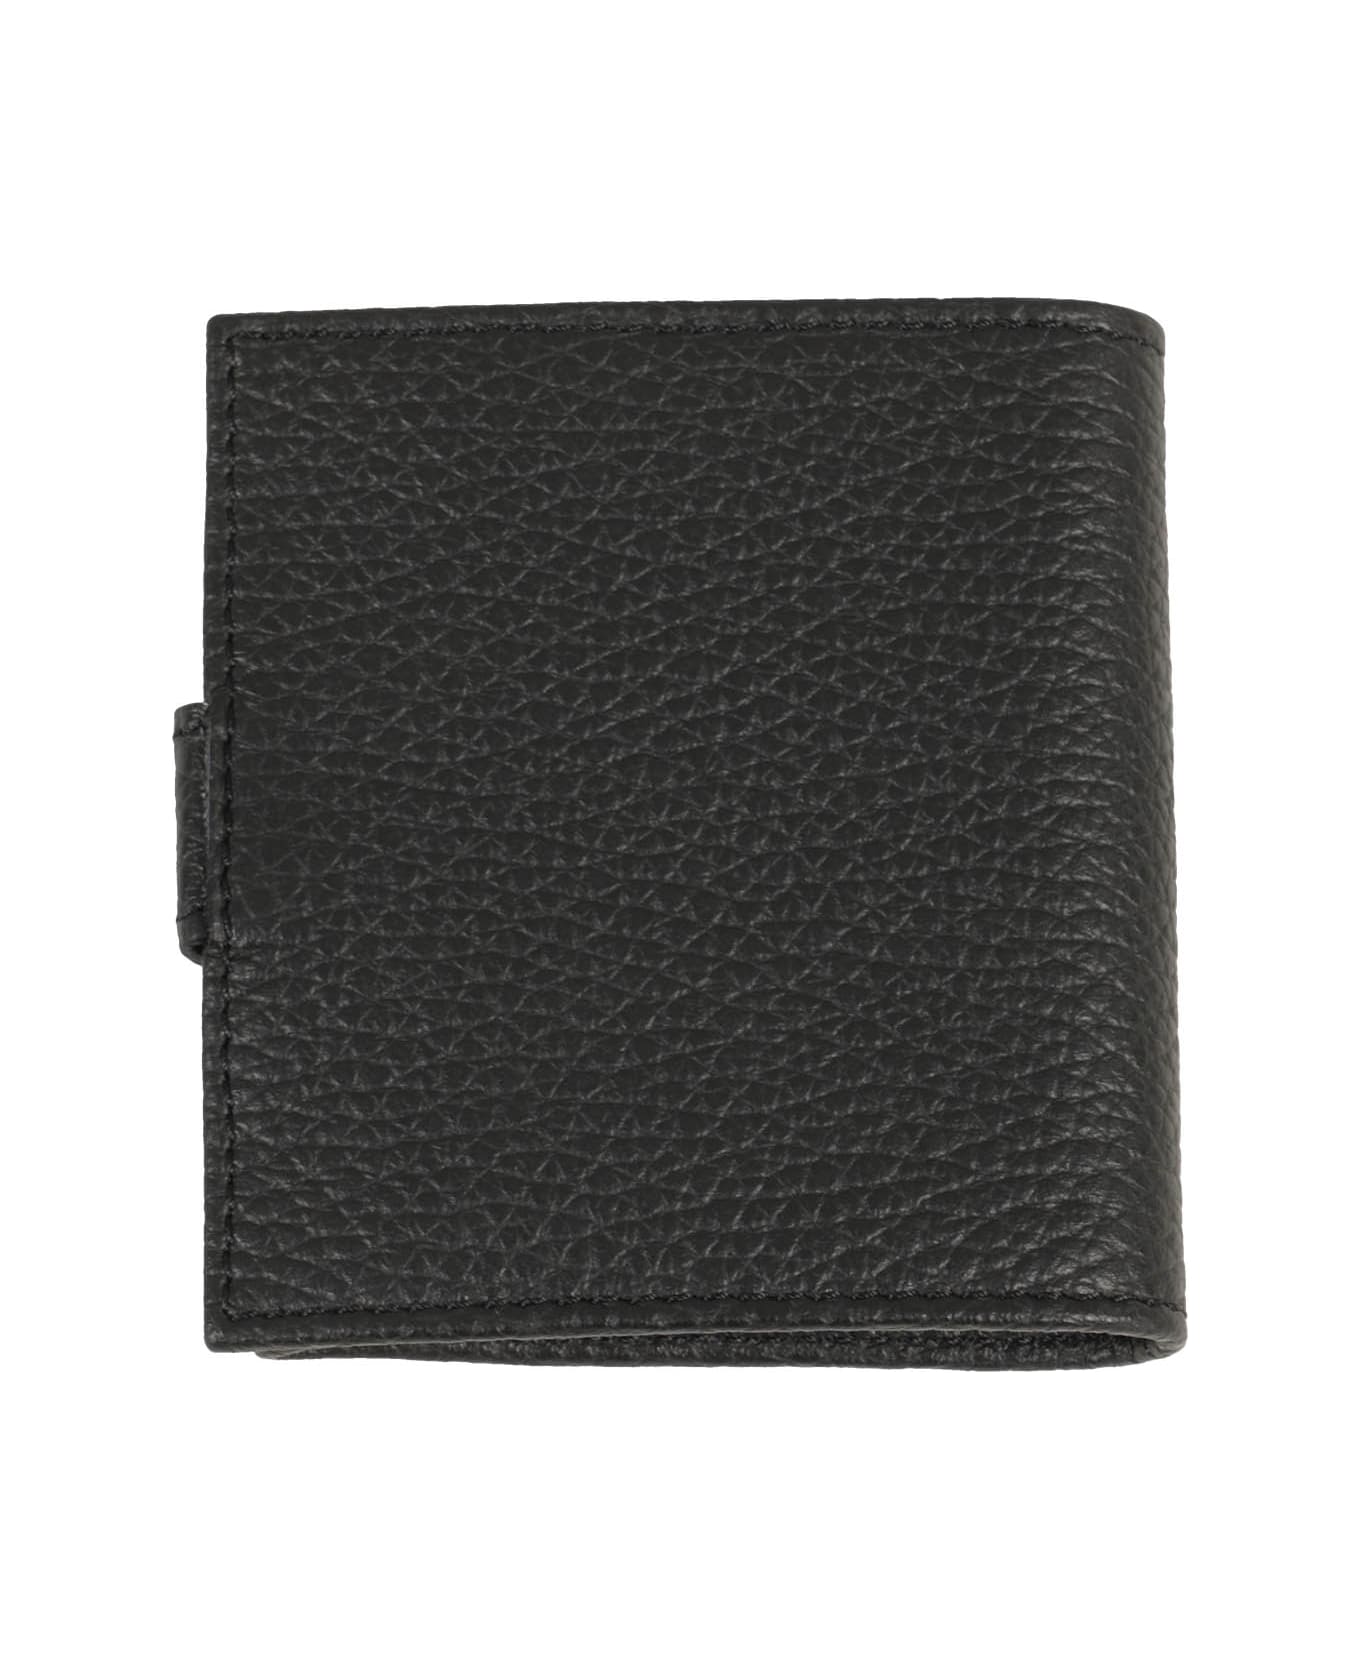 Orciani Leather Wallet - Ner Nero